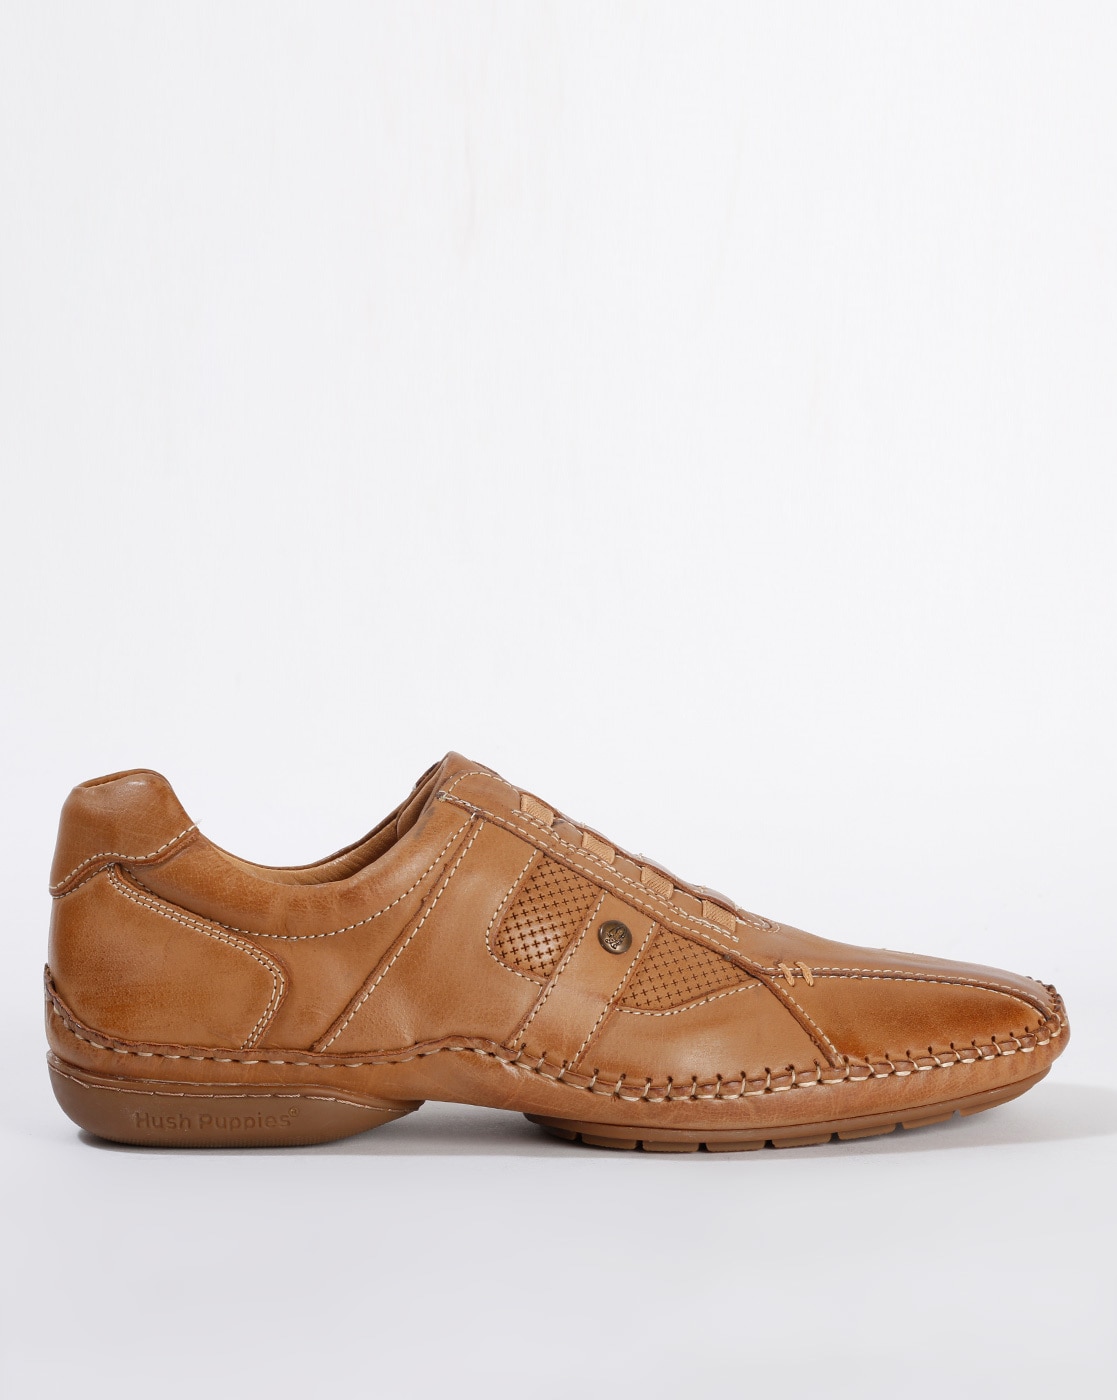 hush puppies casual shoes